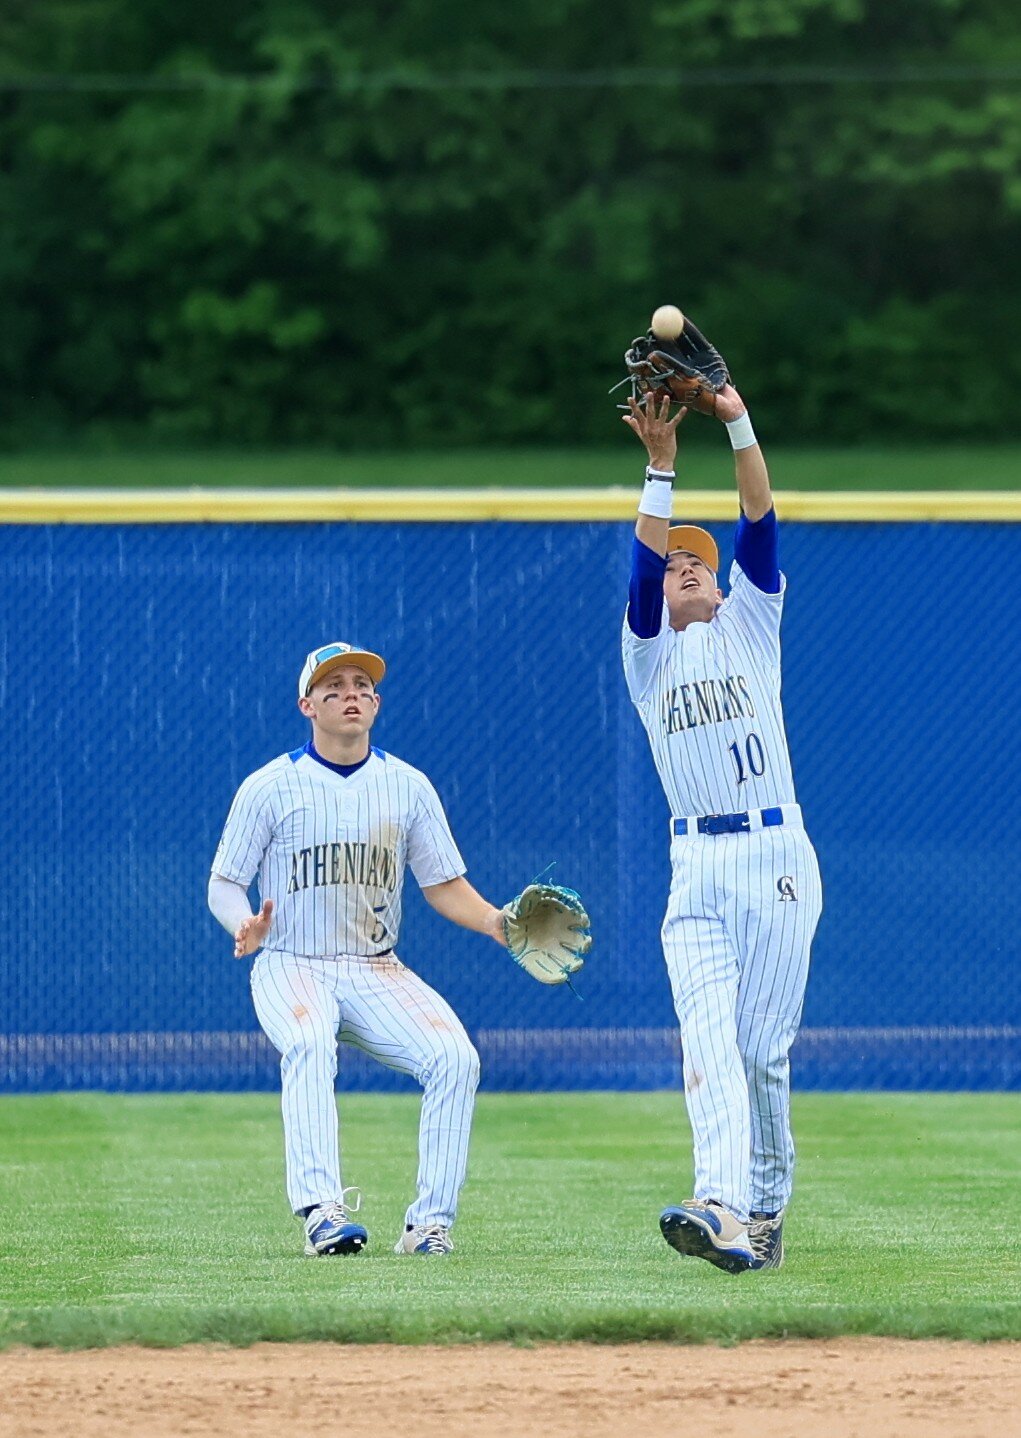 Freshman second baseman Henry Bannon made the final out of the ballgame to secure the Athenian victory.